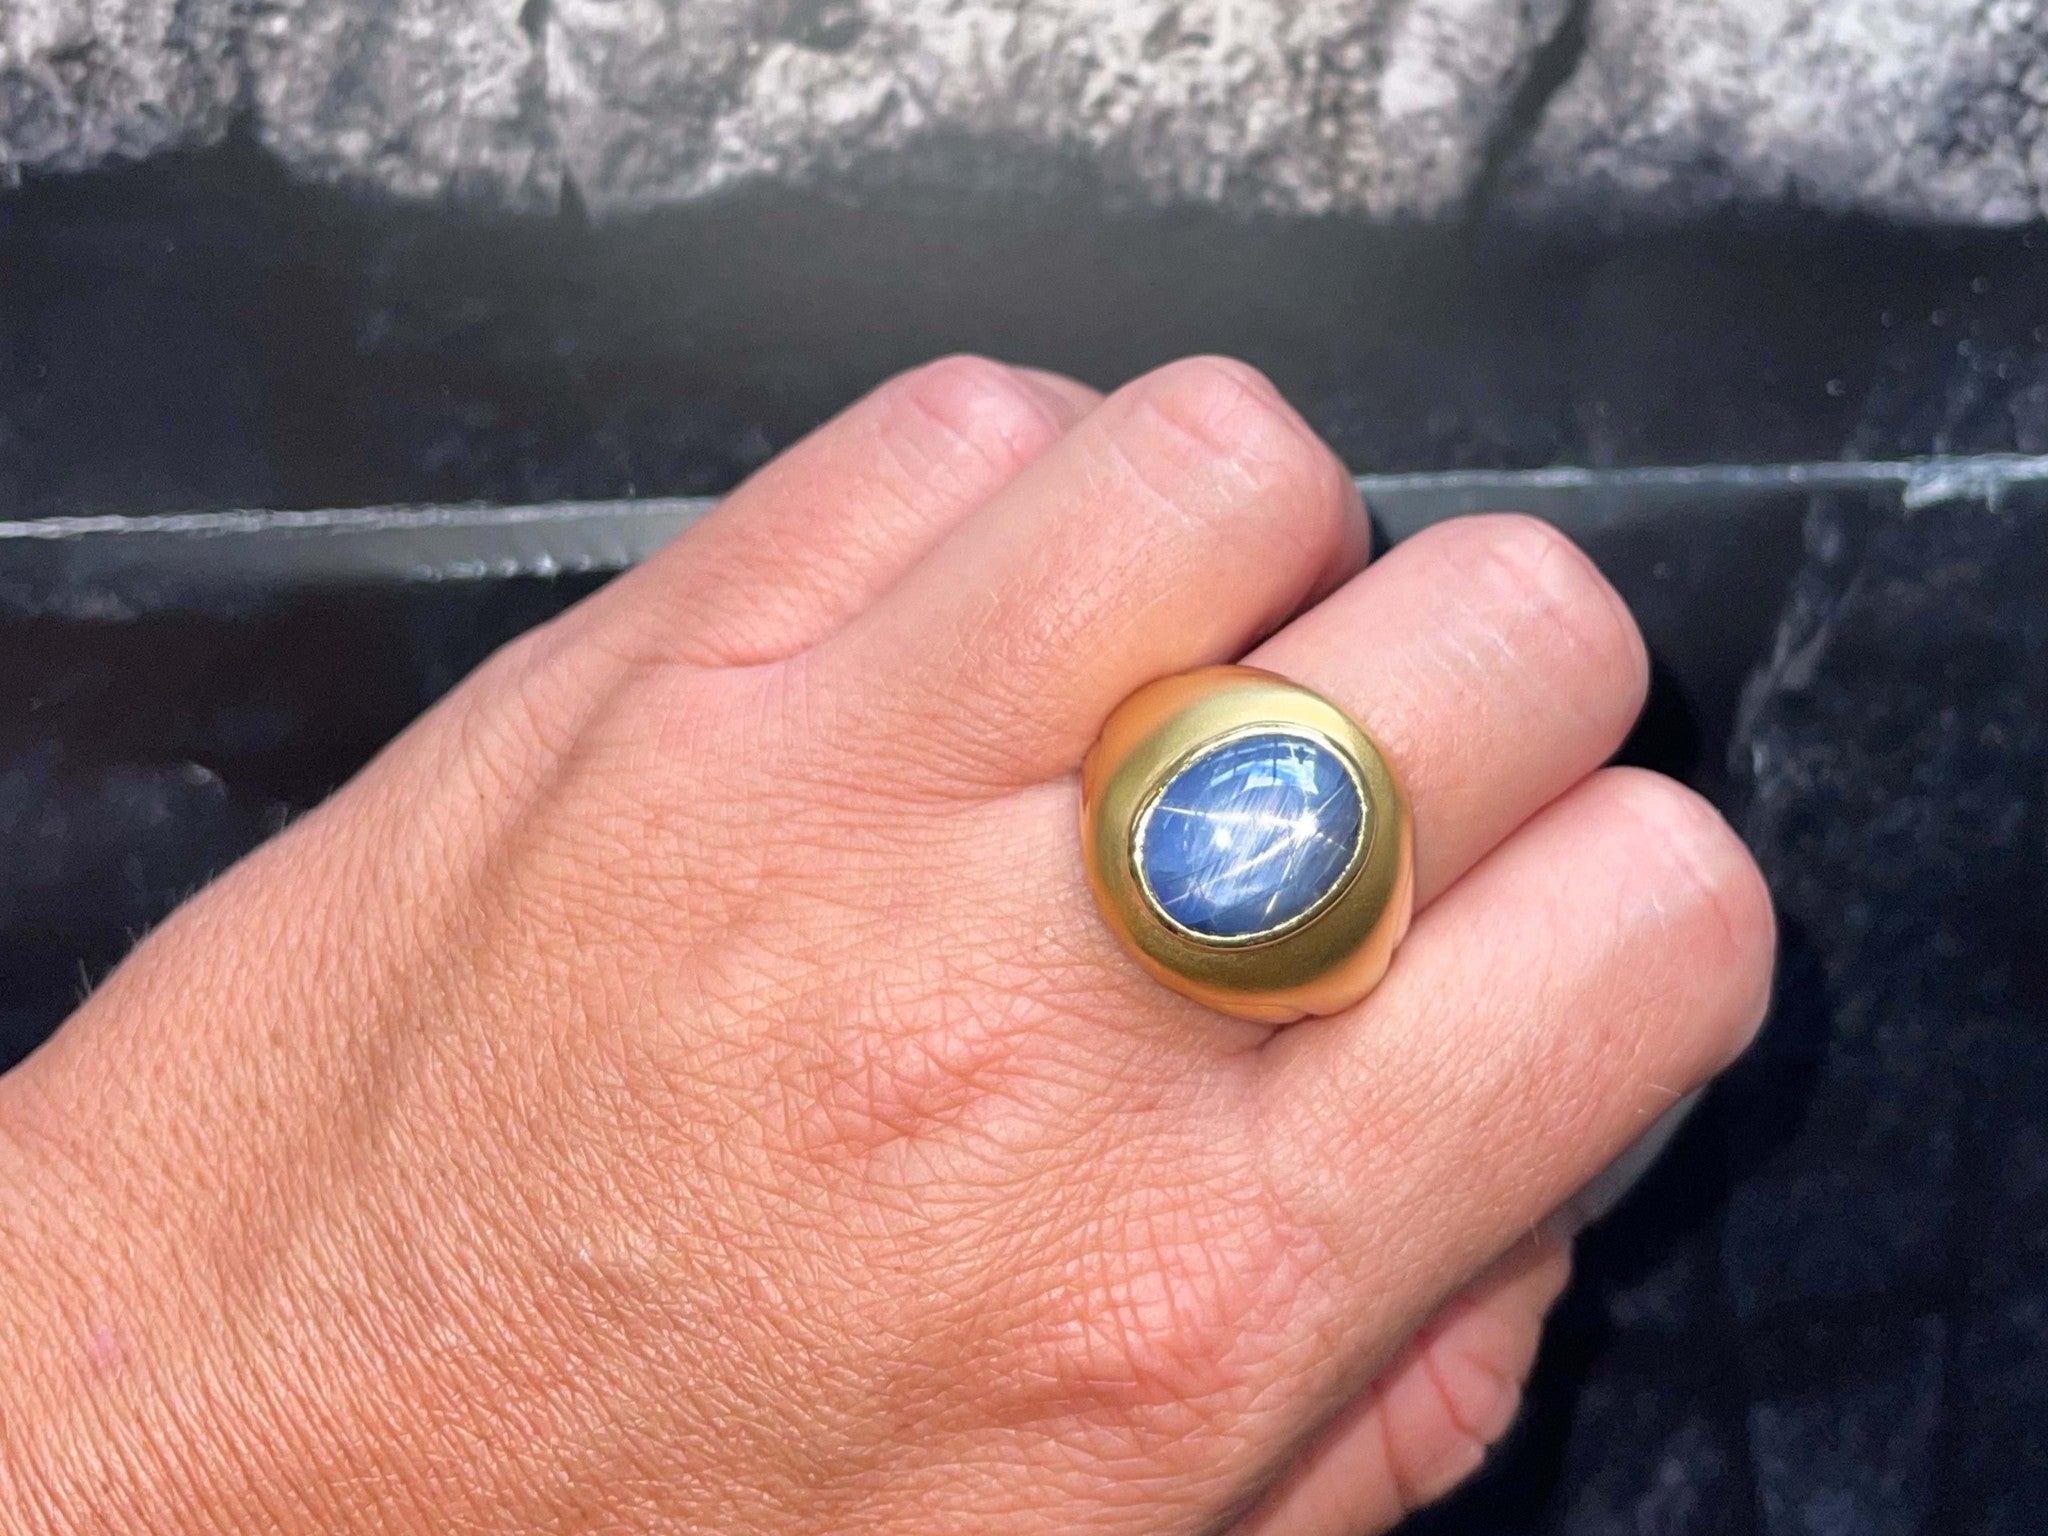 Blue Star Sapphire Ring in 18k Yellow Gold